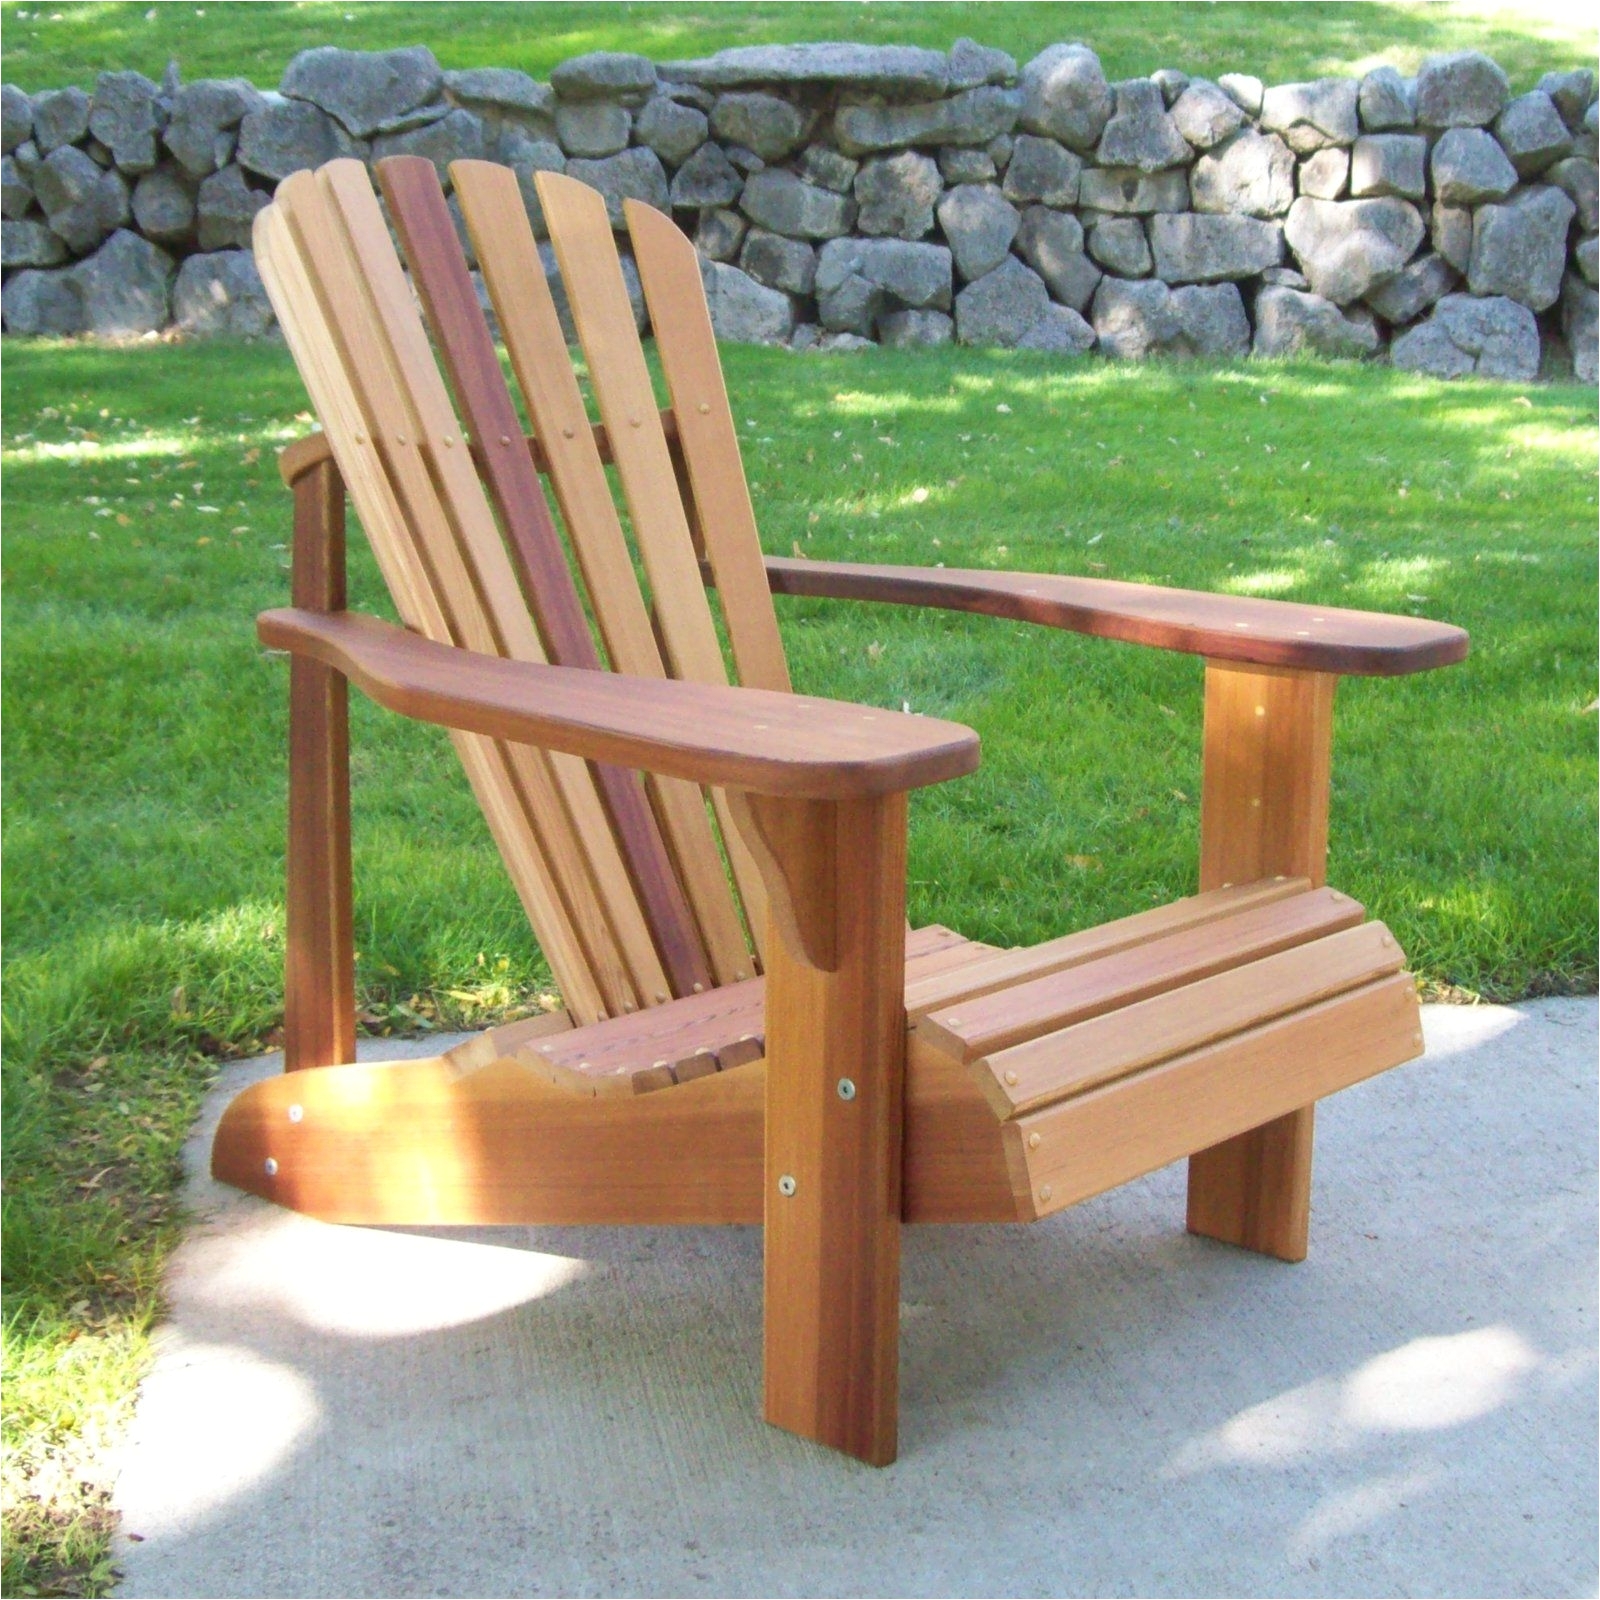 Rustic Wooden Chairs for Rent Chair Wooden Patio Chairs Wood Patio Wooden Garden Seats Wooden